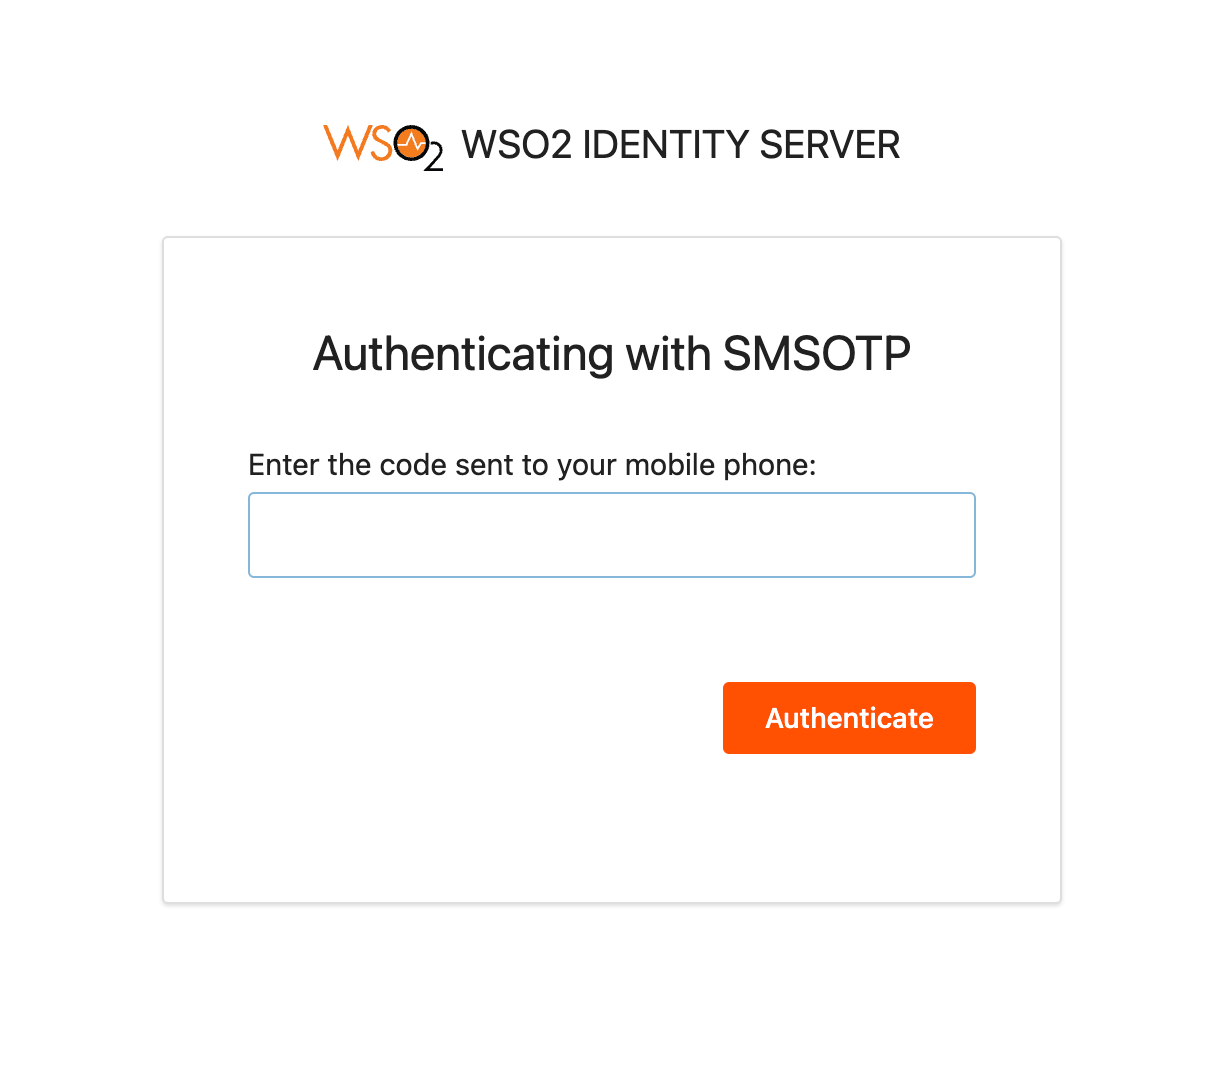 sms-otp-authenticating